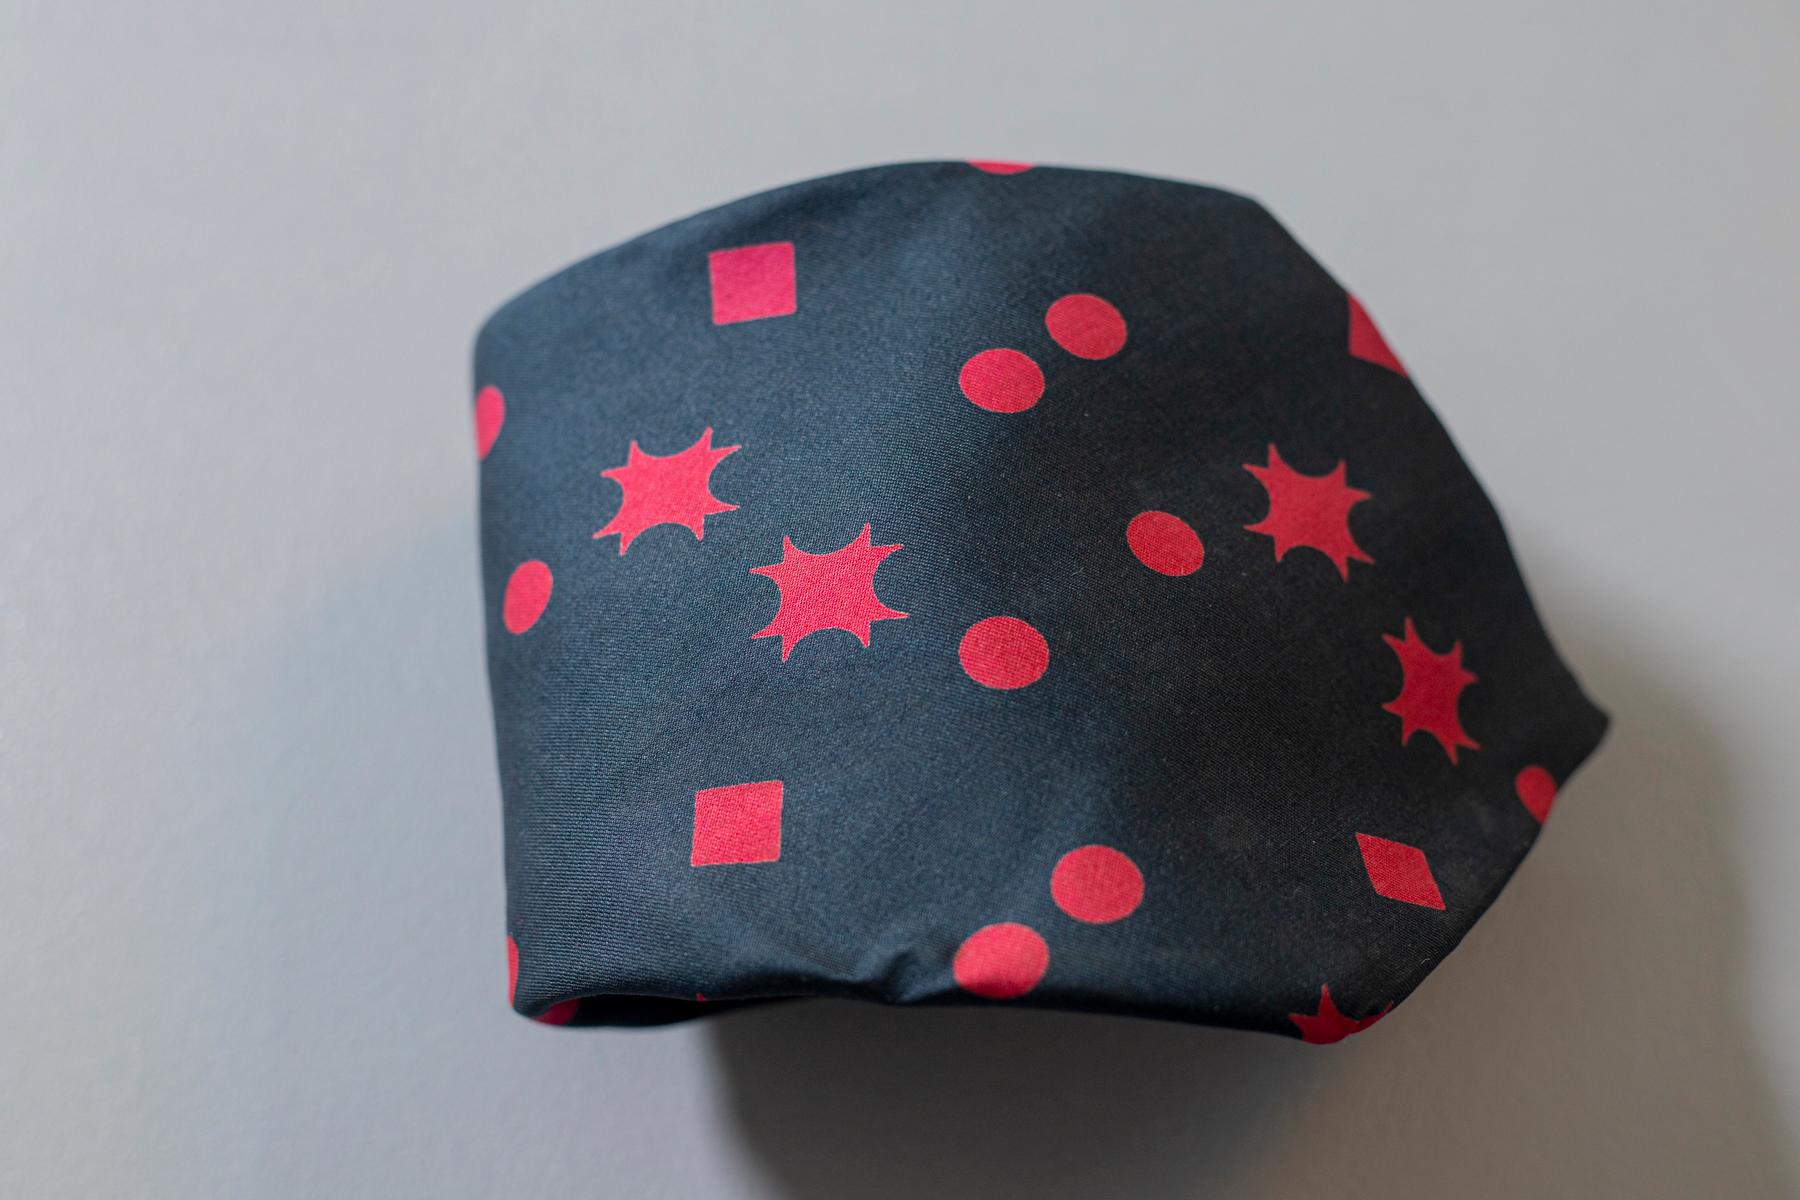 Vintage tie designed by Piere D’Albye, it is made of 100% silk, decorated with small red geometric shapes on a blue background. Ideal for a cocktail party with friends, we recommend combining it with a blue suit and a white shirt, or with a more